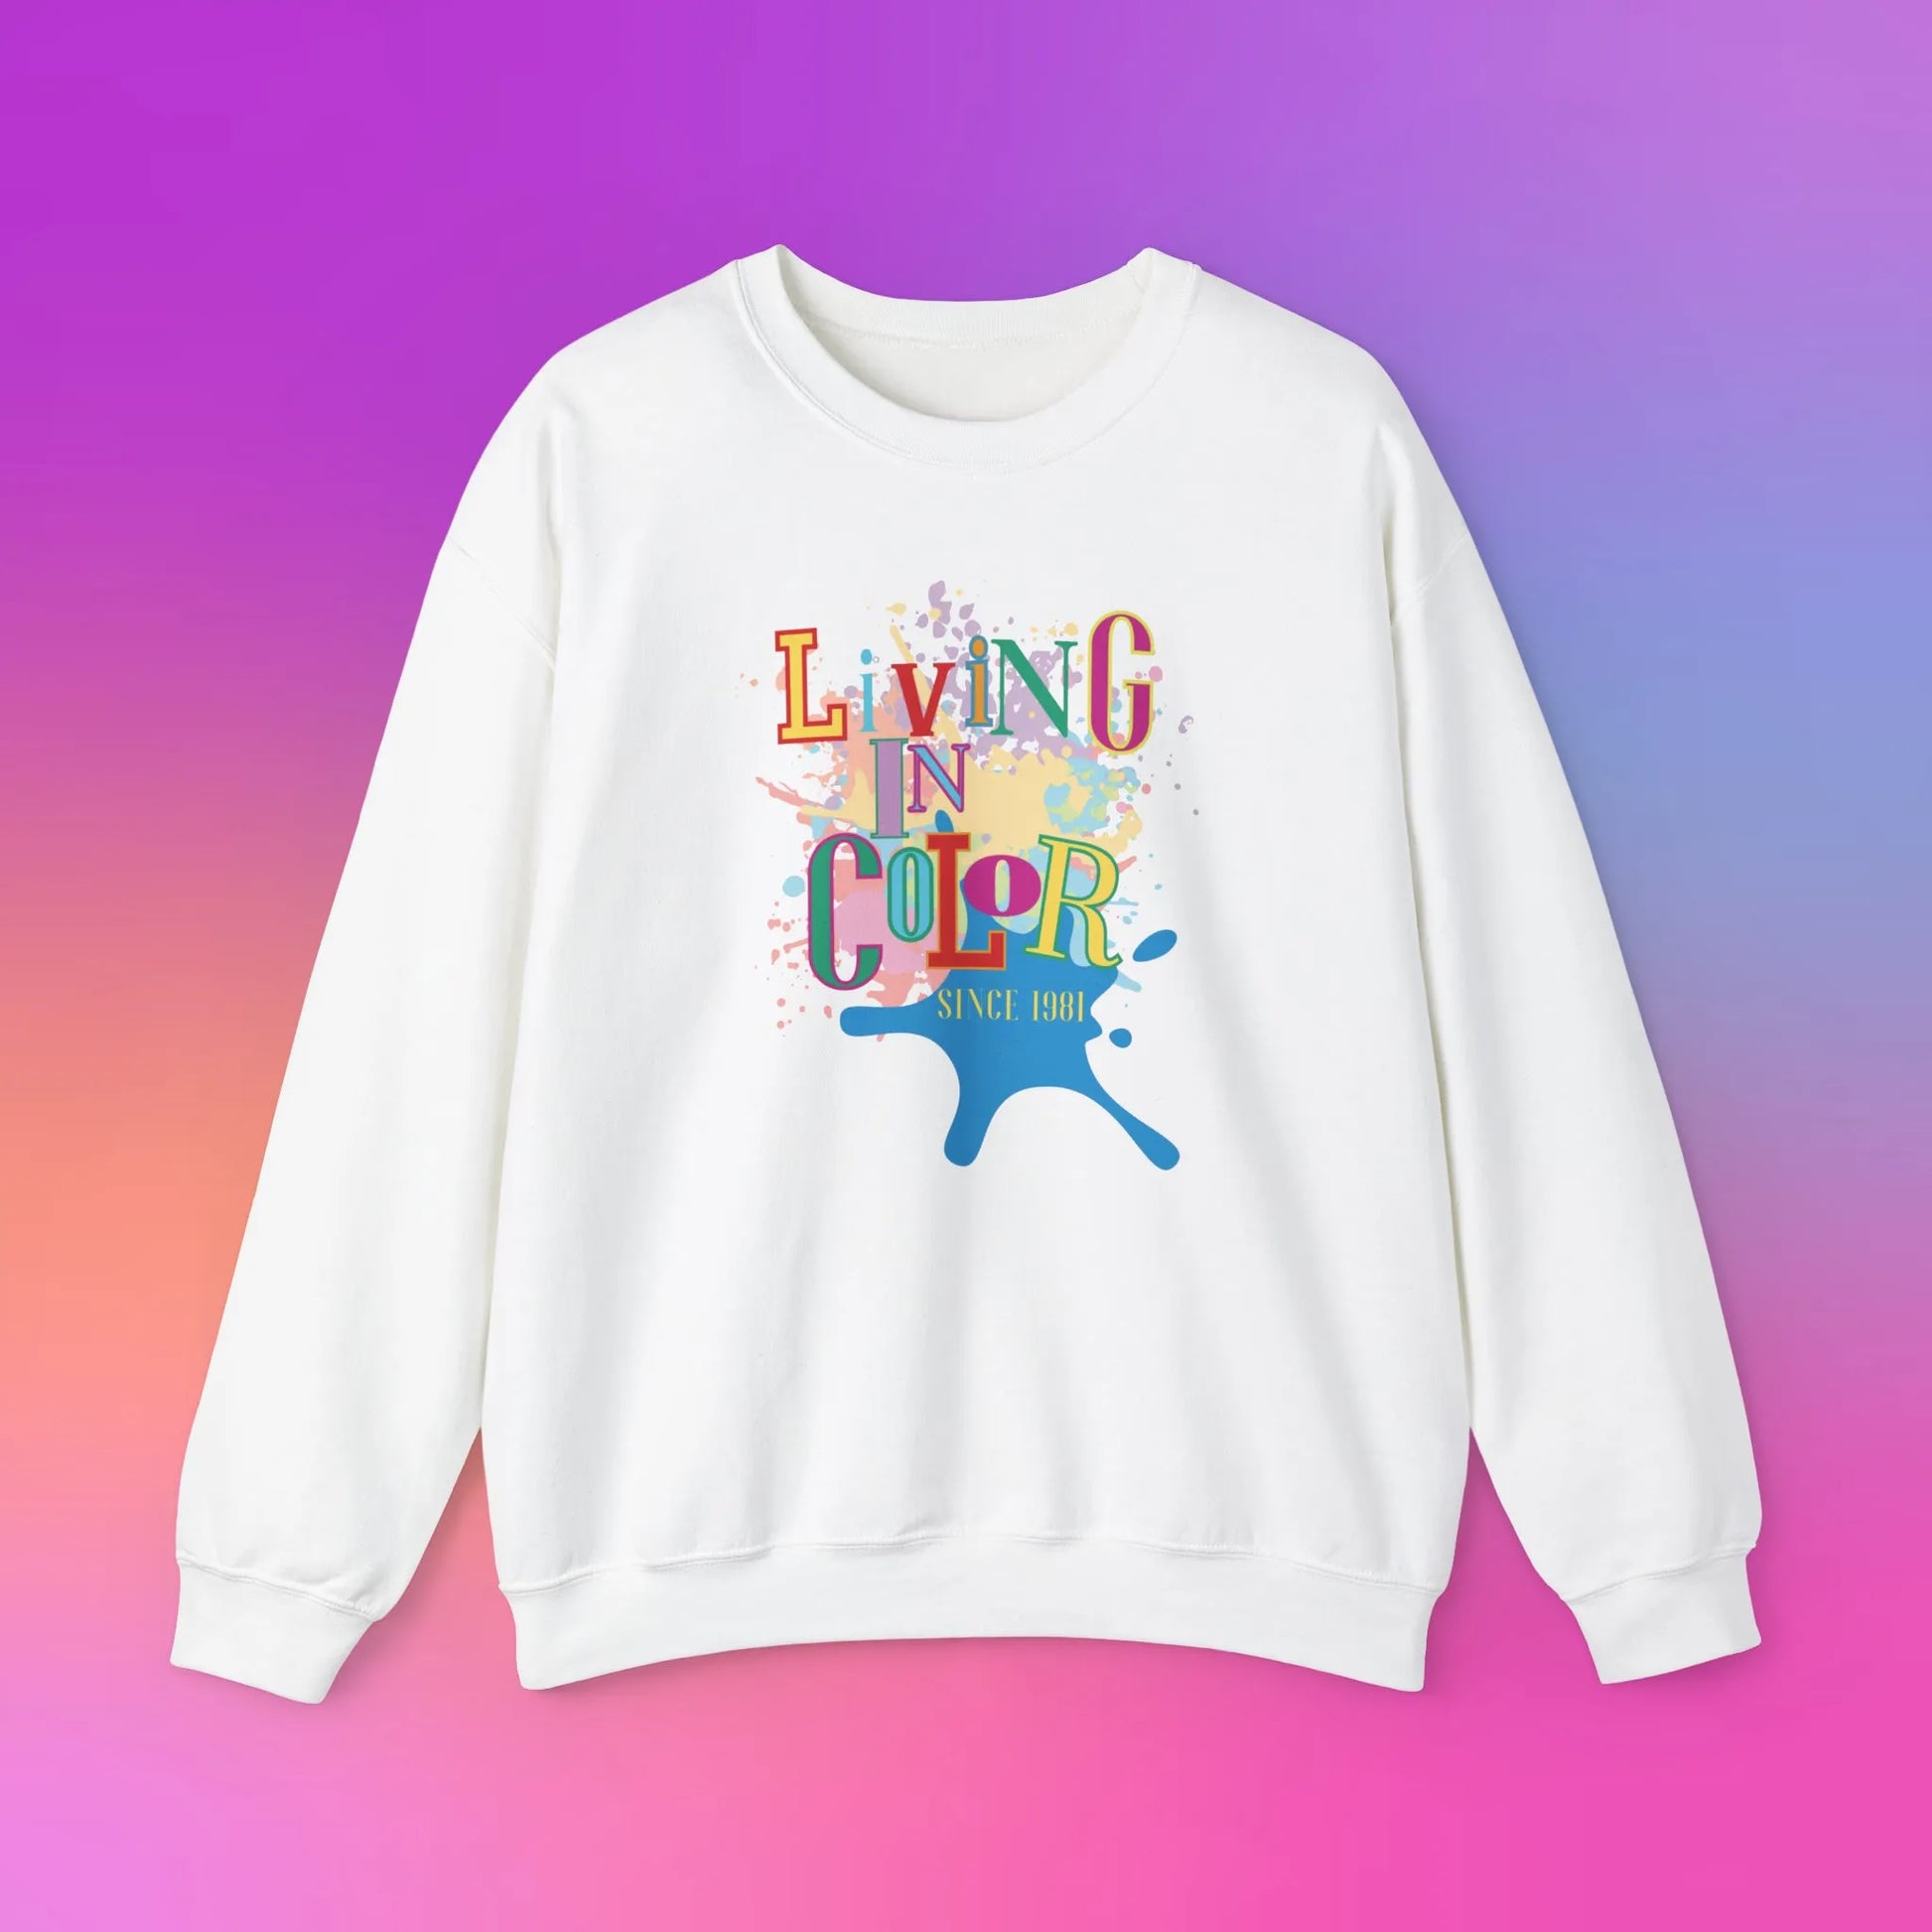 Living In Color 90s Throwback Sweatshirt - Living In Color Since Custom Birth Year Retro Sweatshirt - Retro In Living Color 90s Inspired Sweatshirt - Personalize It Toledo